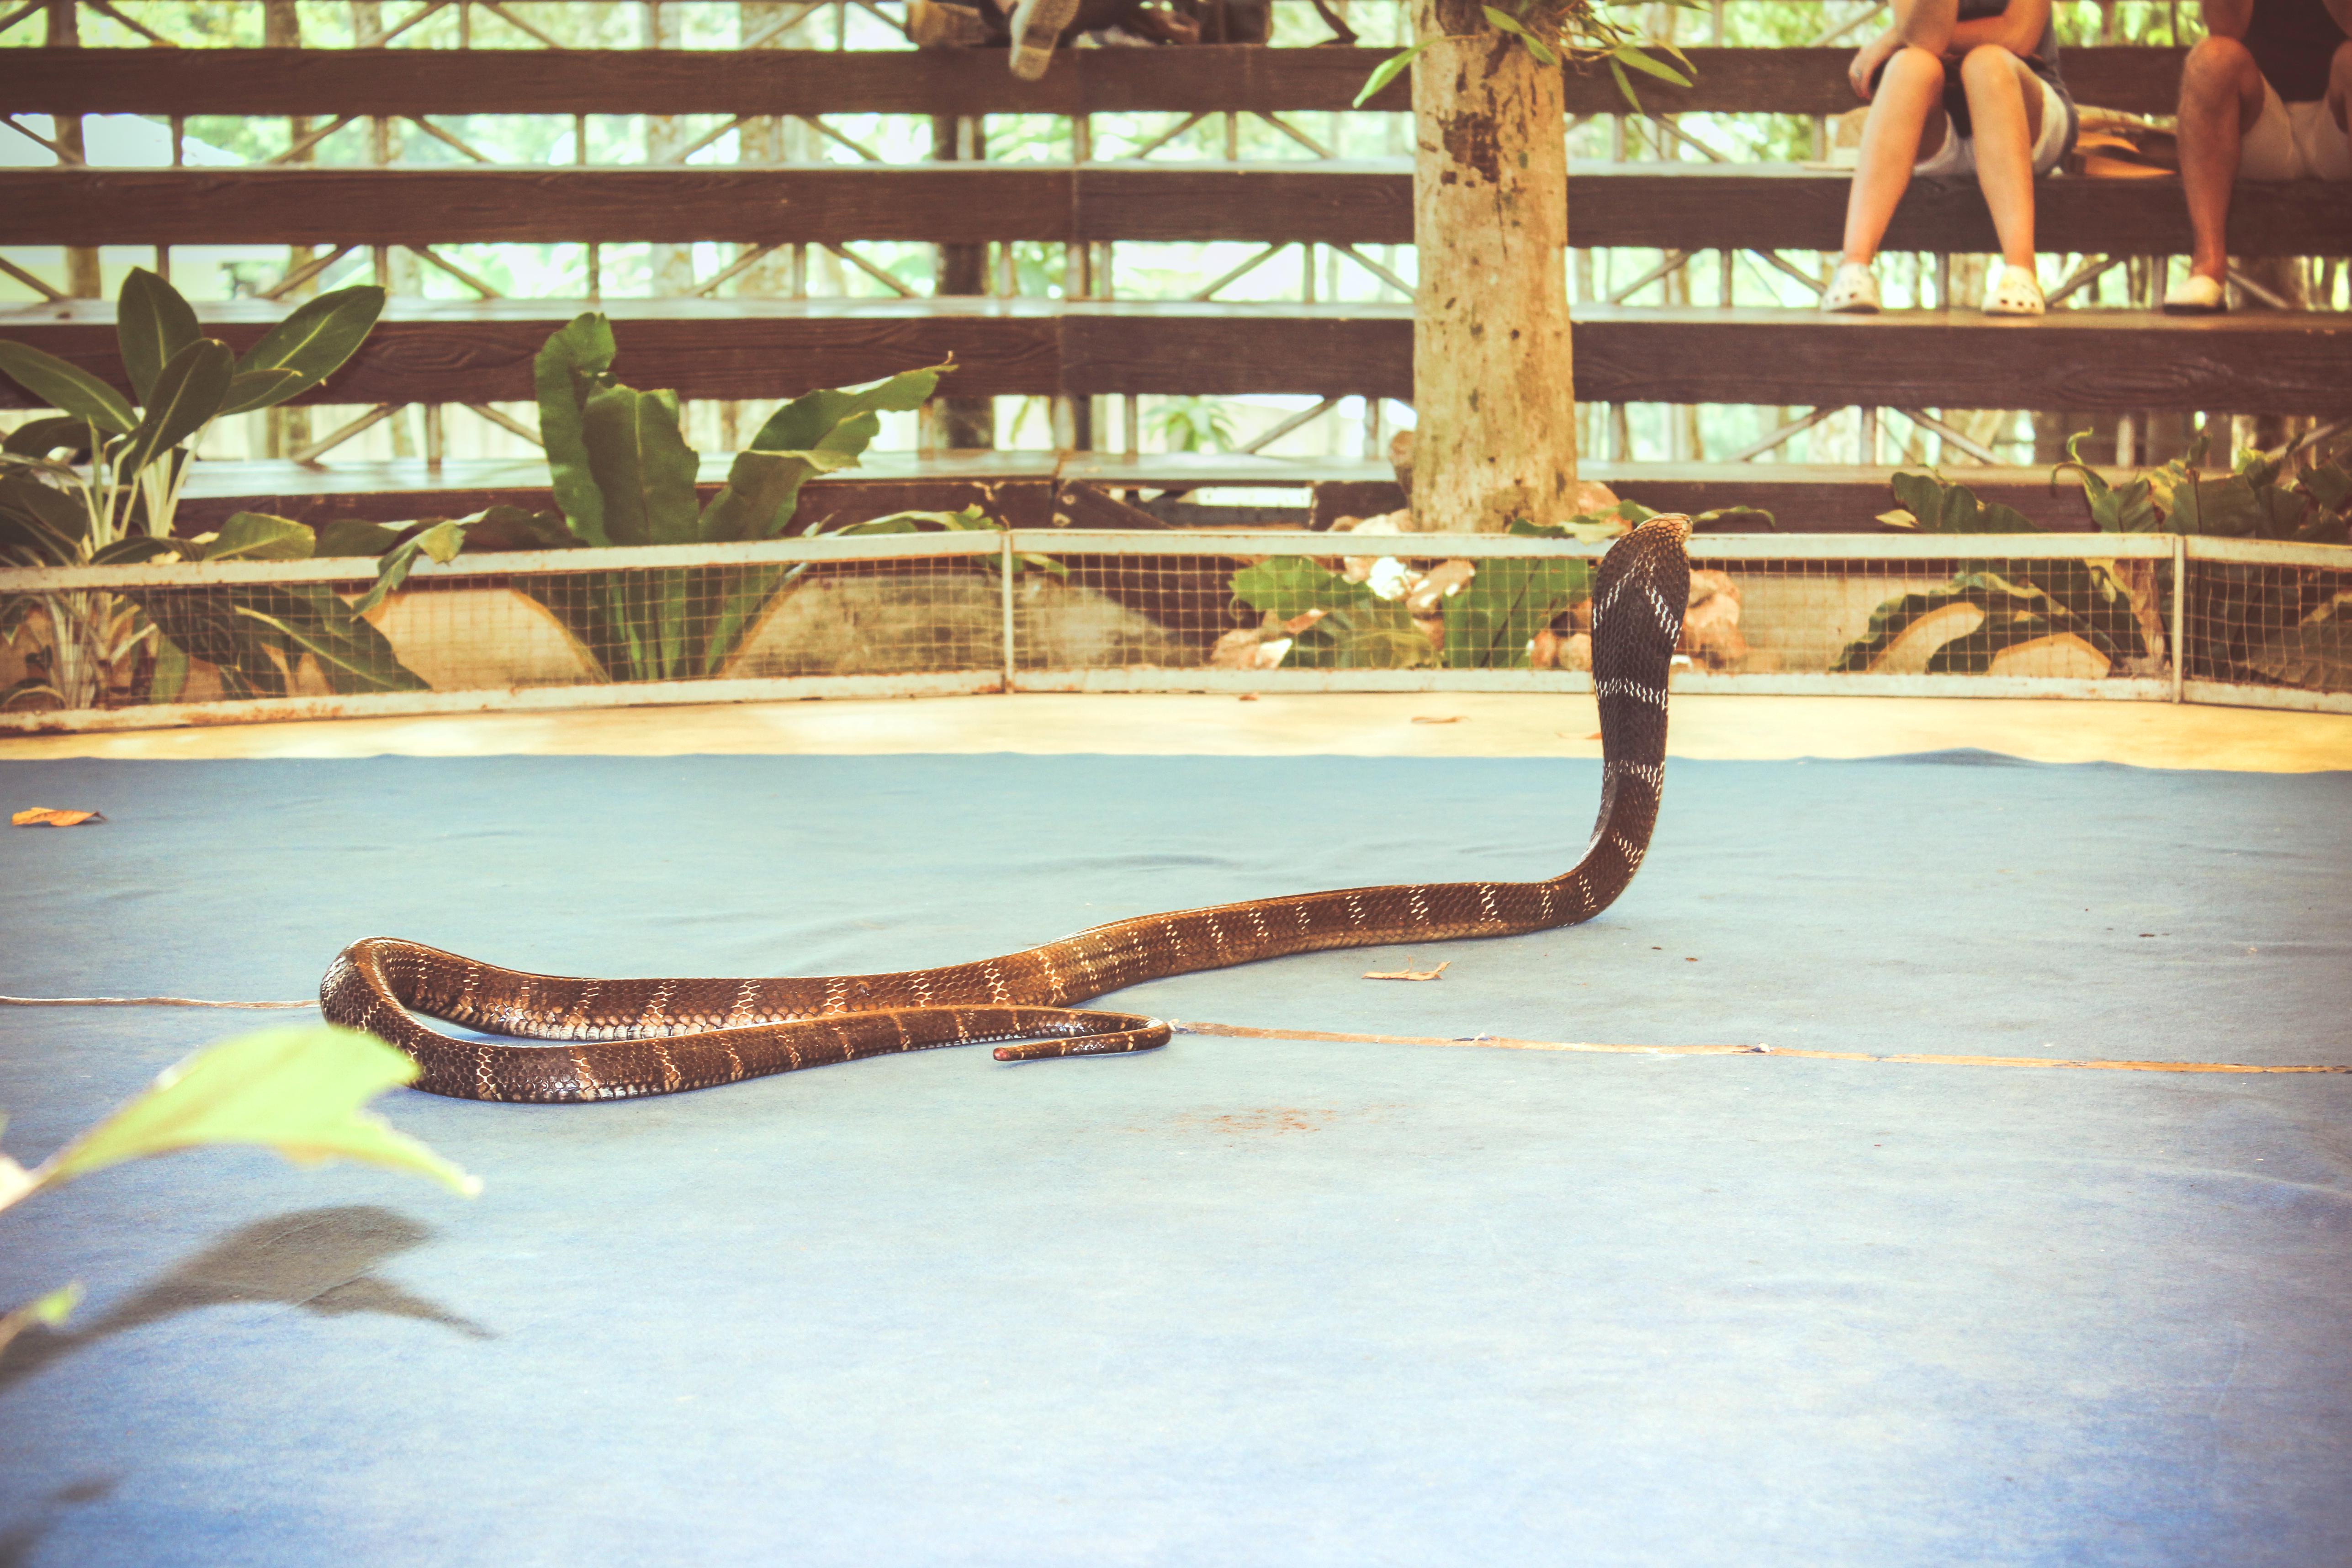 King cobras in Thailand: why some villagers worship the snake and others  drink its blood